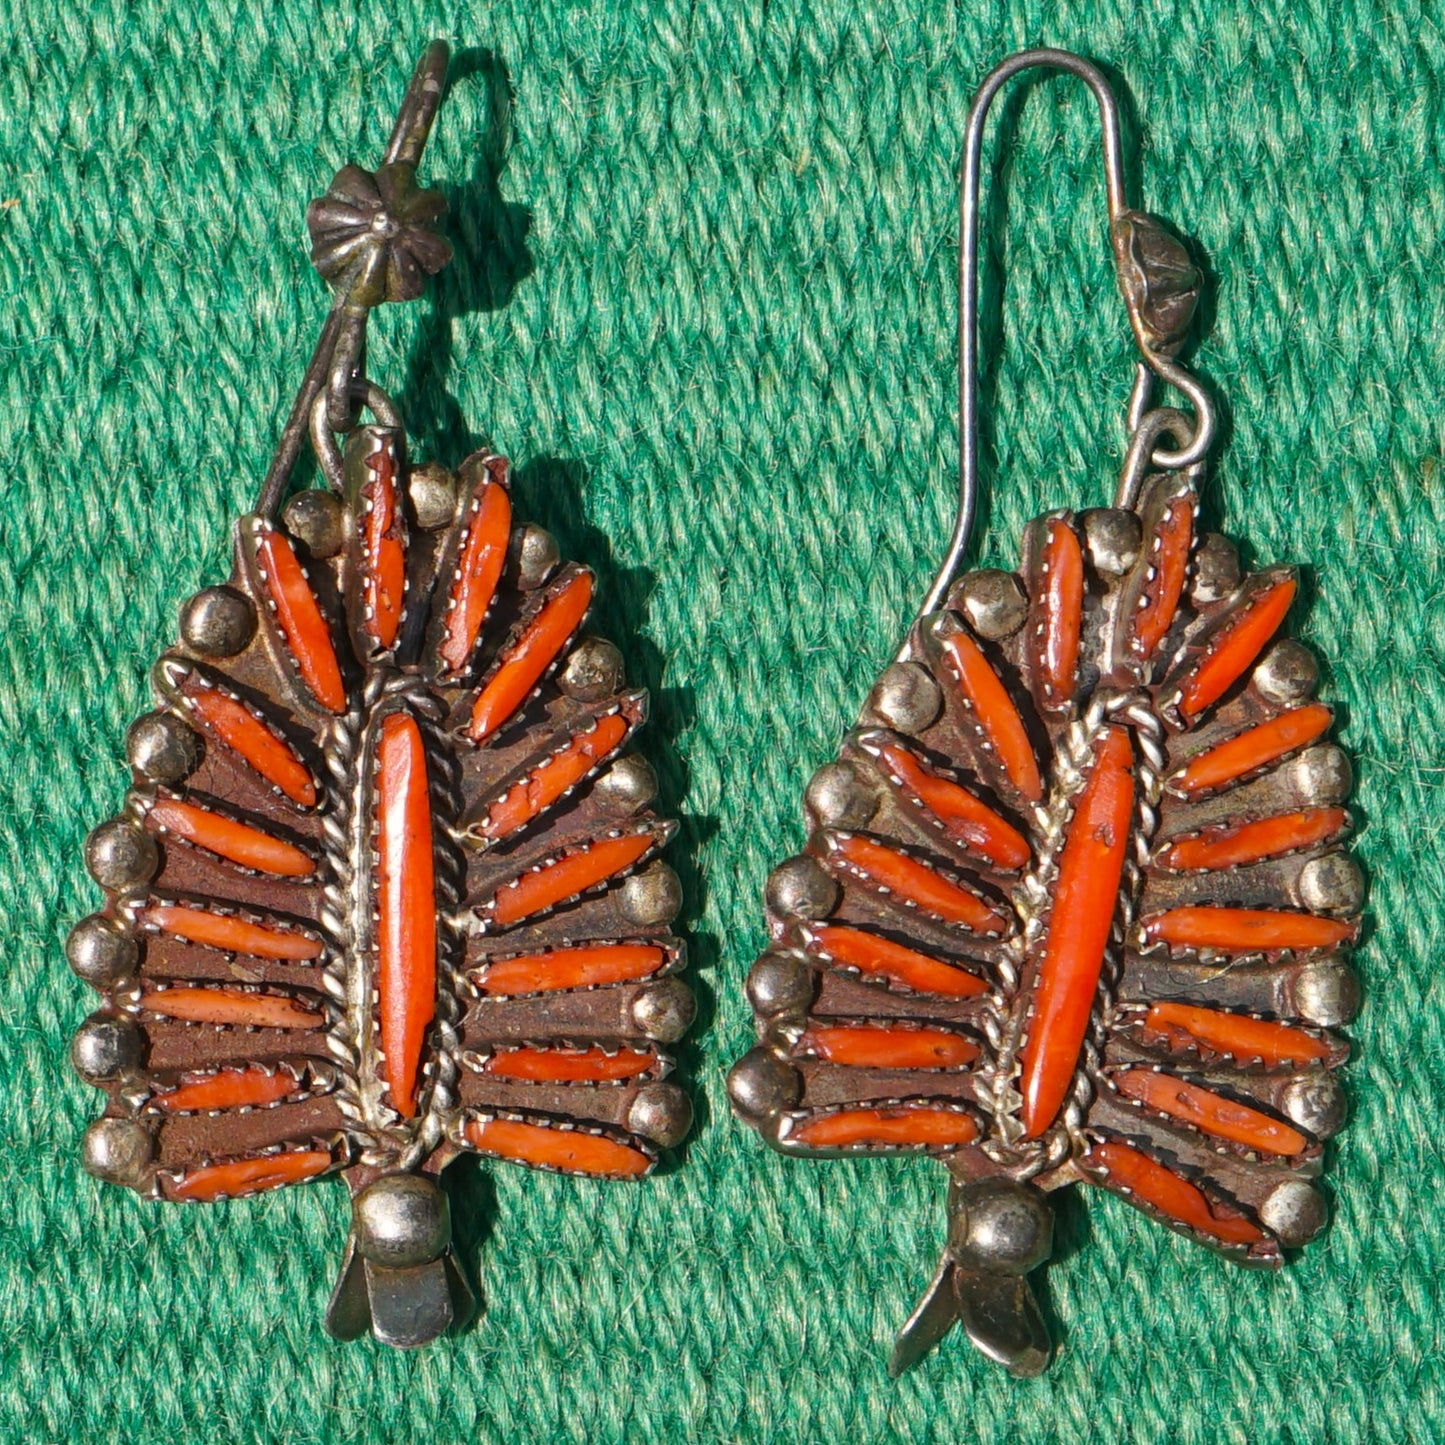 Vintage Zuni Coral Needle Point Squash Blossom Earrings